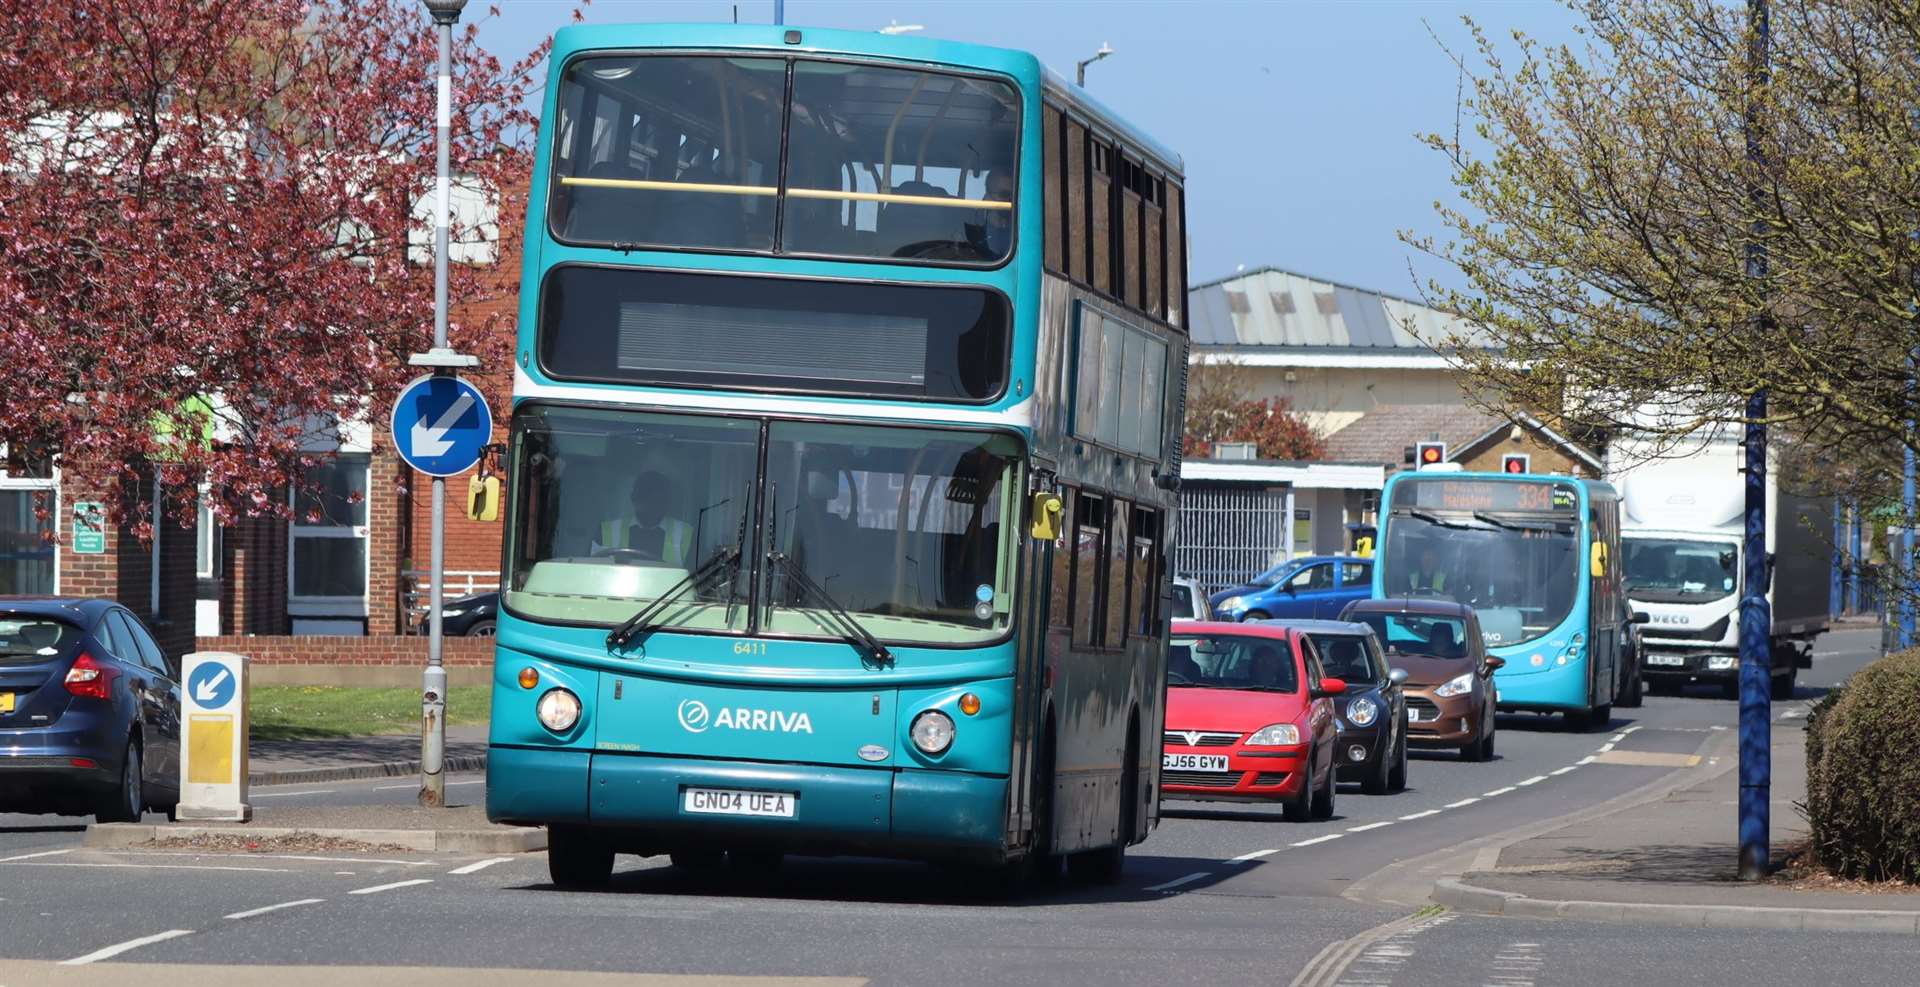 Arriva buses in Millennium Way Sheerness